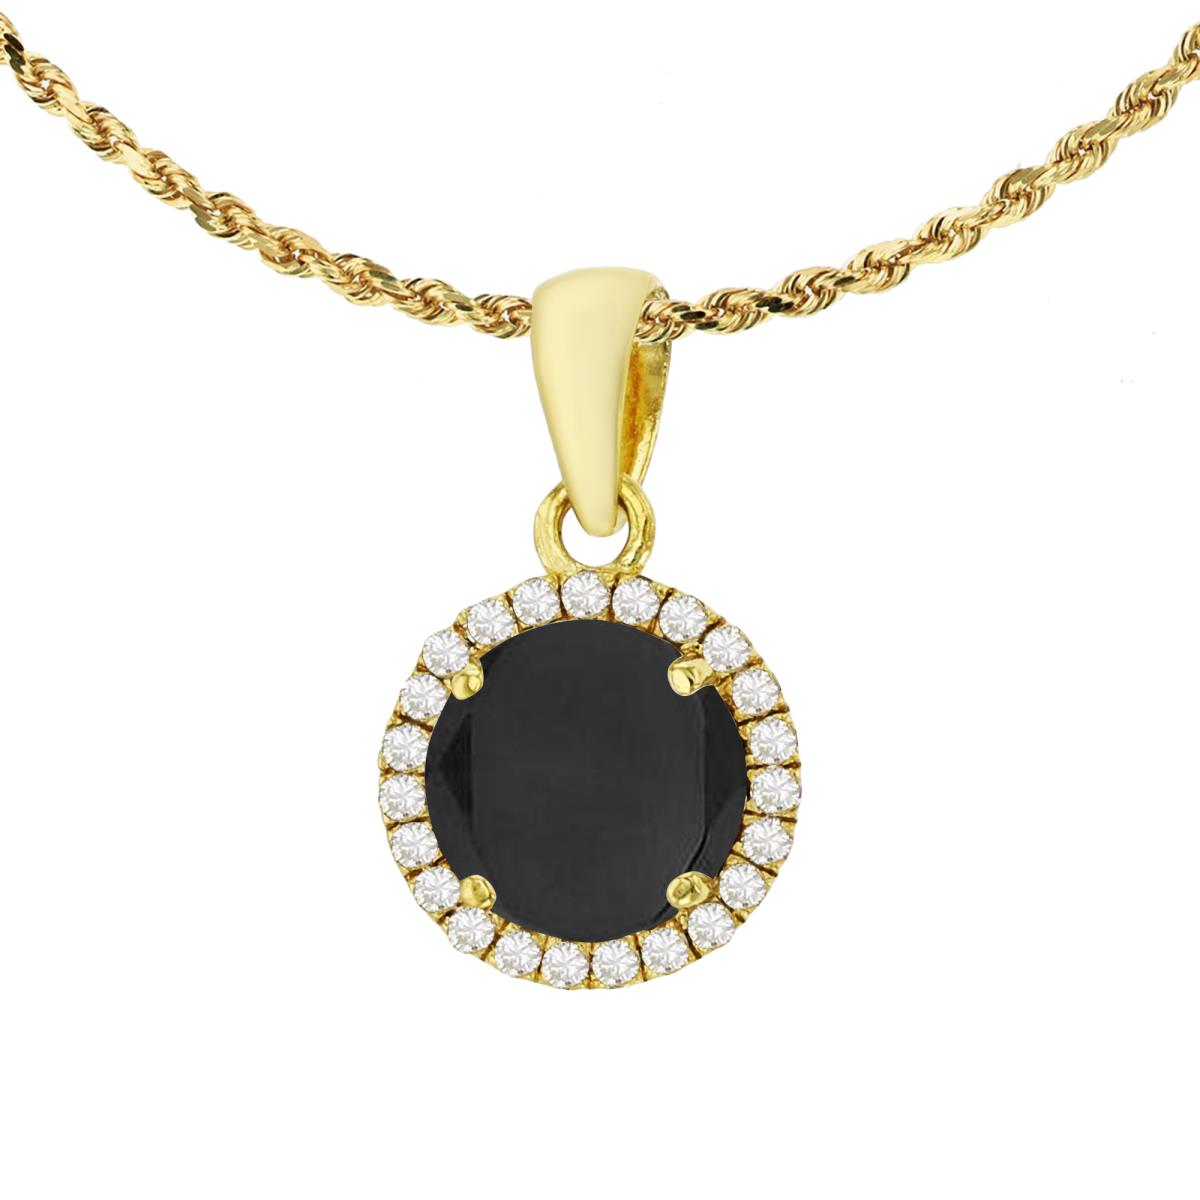 10K Yellow Gold 7mm Cushion Onyx & 0.12 CTTW Diamond Halo 18" Rope Chain Necklace